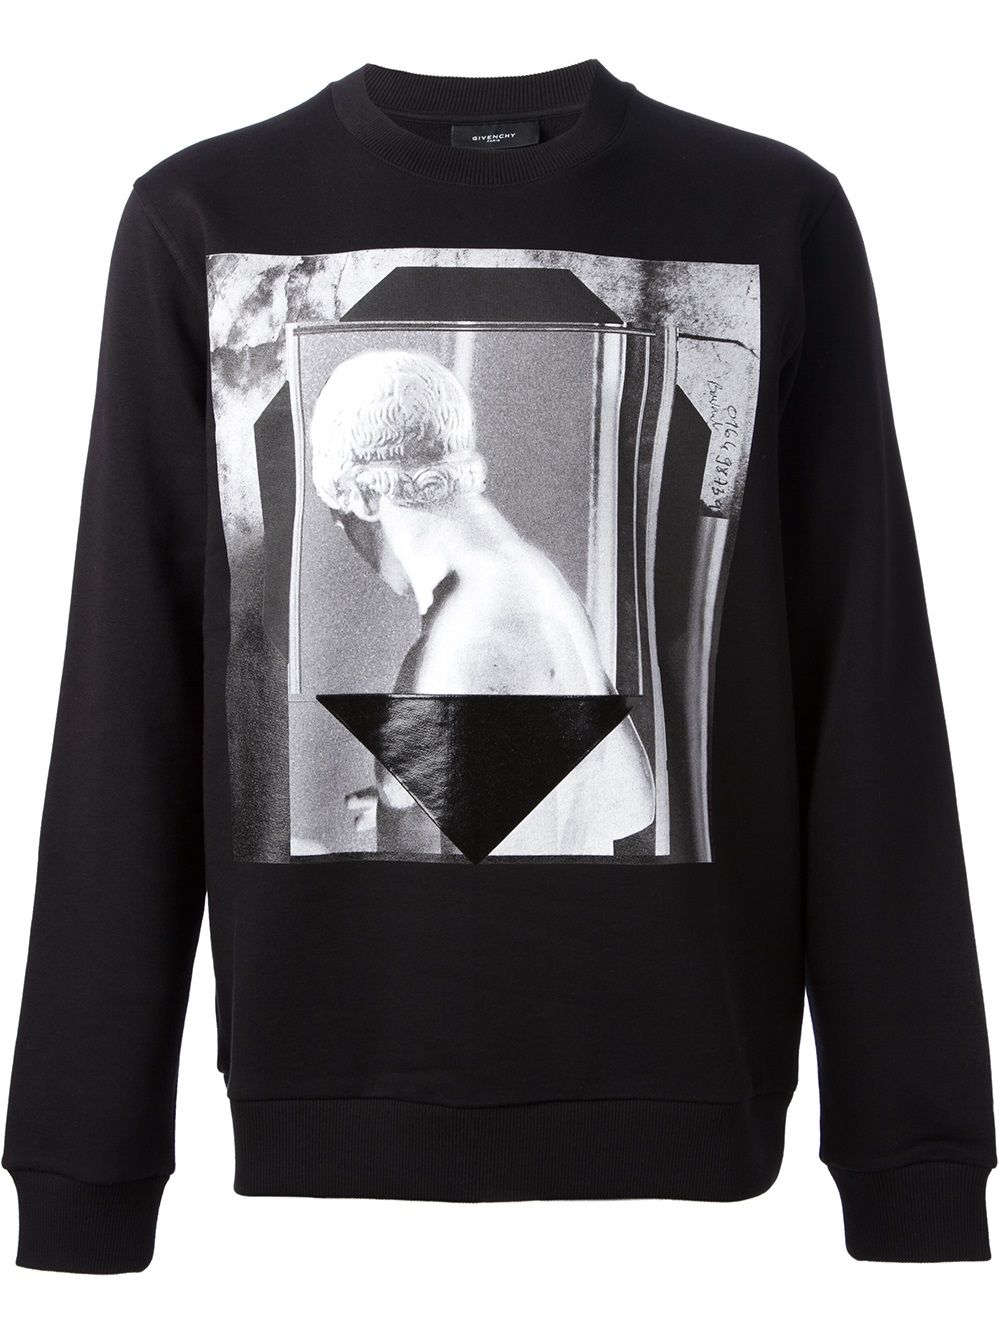 Lyst - Givenchy Printed Sweatshirt in Black for Men